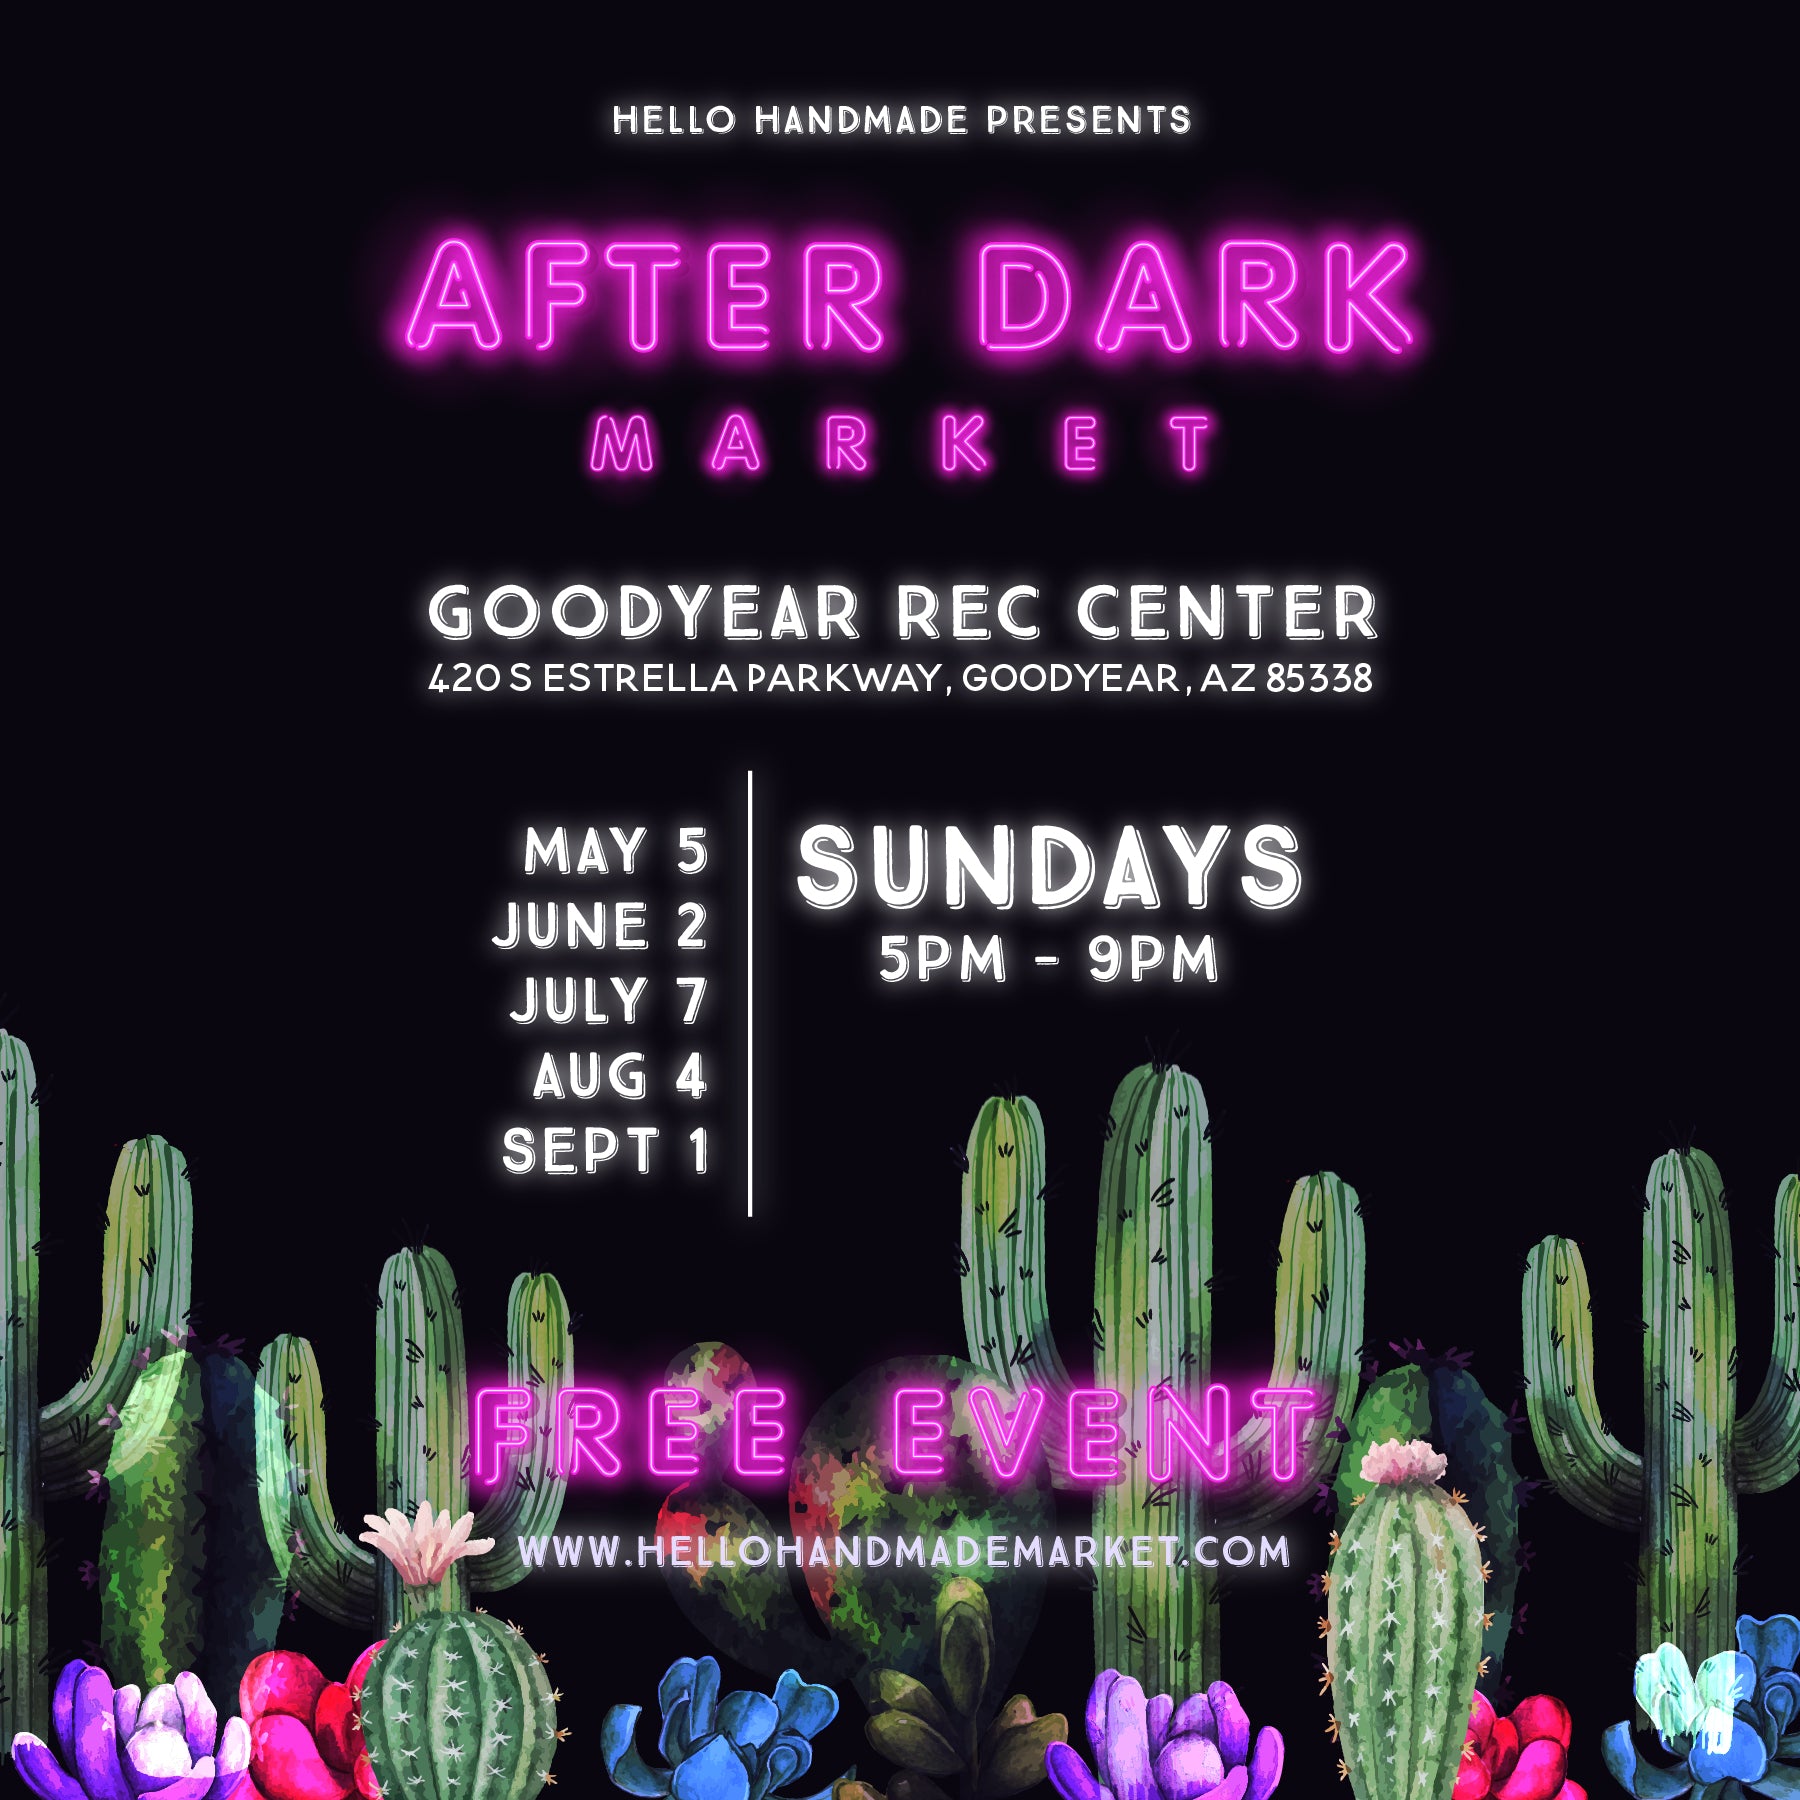 Be a Vendor at our After Dark Summer Sundays at the Goodyear Rec Center